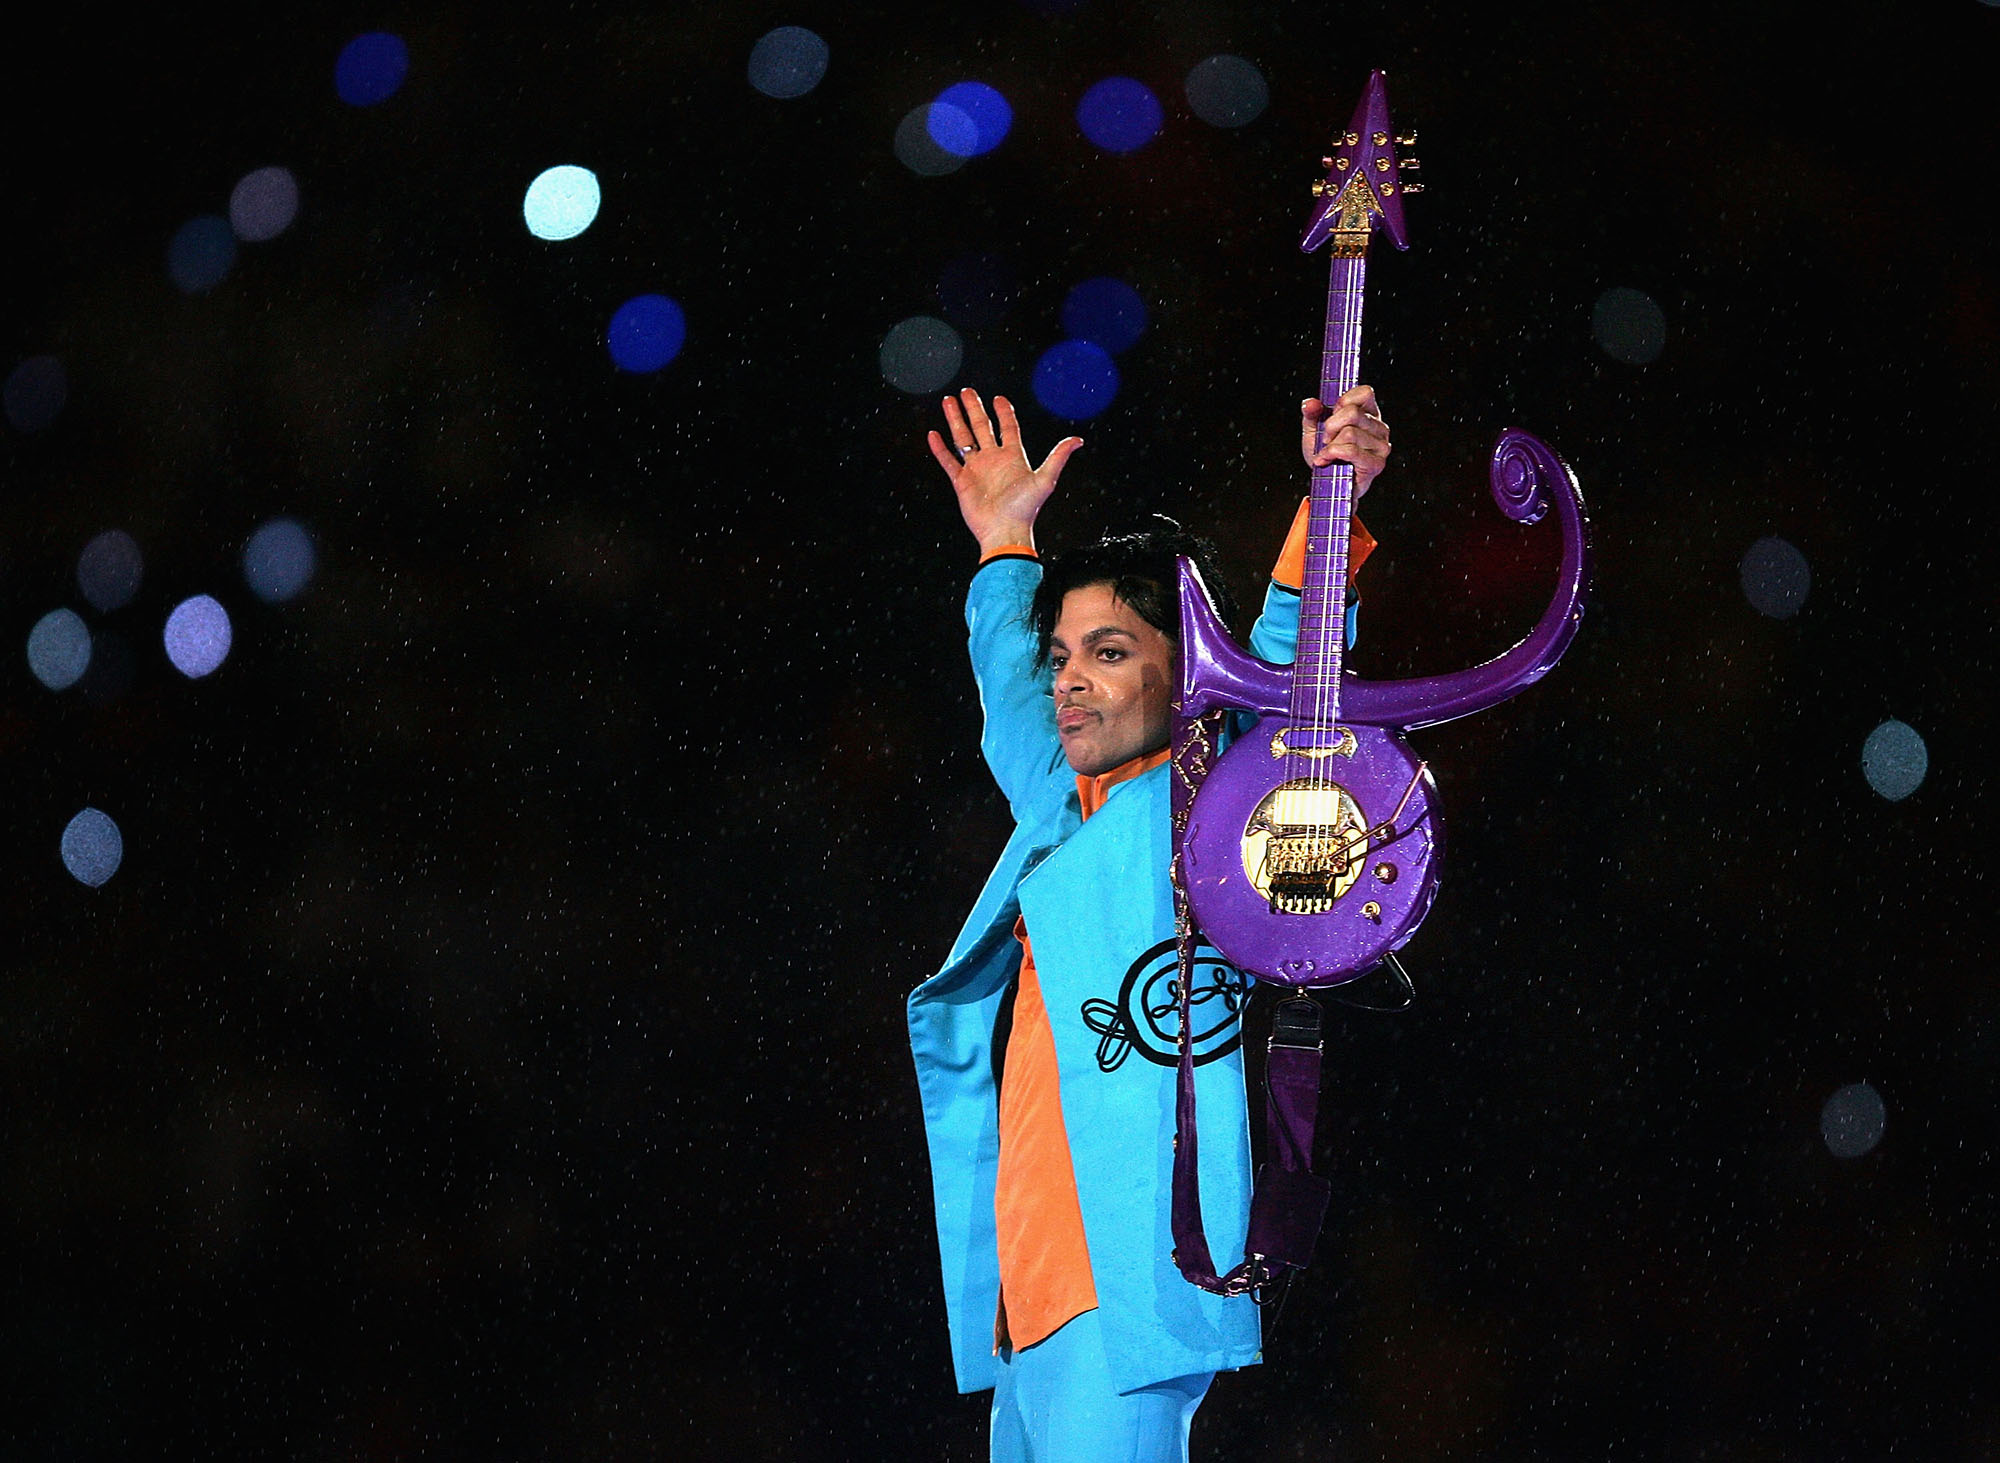 Prince performs during the "Pepsi Halftime Show" at Super Bowl XLI between the Indianapolis Colts and the Chicago Bears on February 4, 2007 at Dolphin Stadium in Miami Gardens, Florida.  (Photo by Jonathan Daniel/Getty Images) (Jonathan Daniel&mdash;Getty Images)